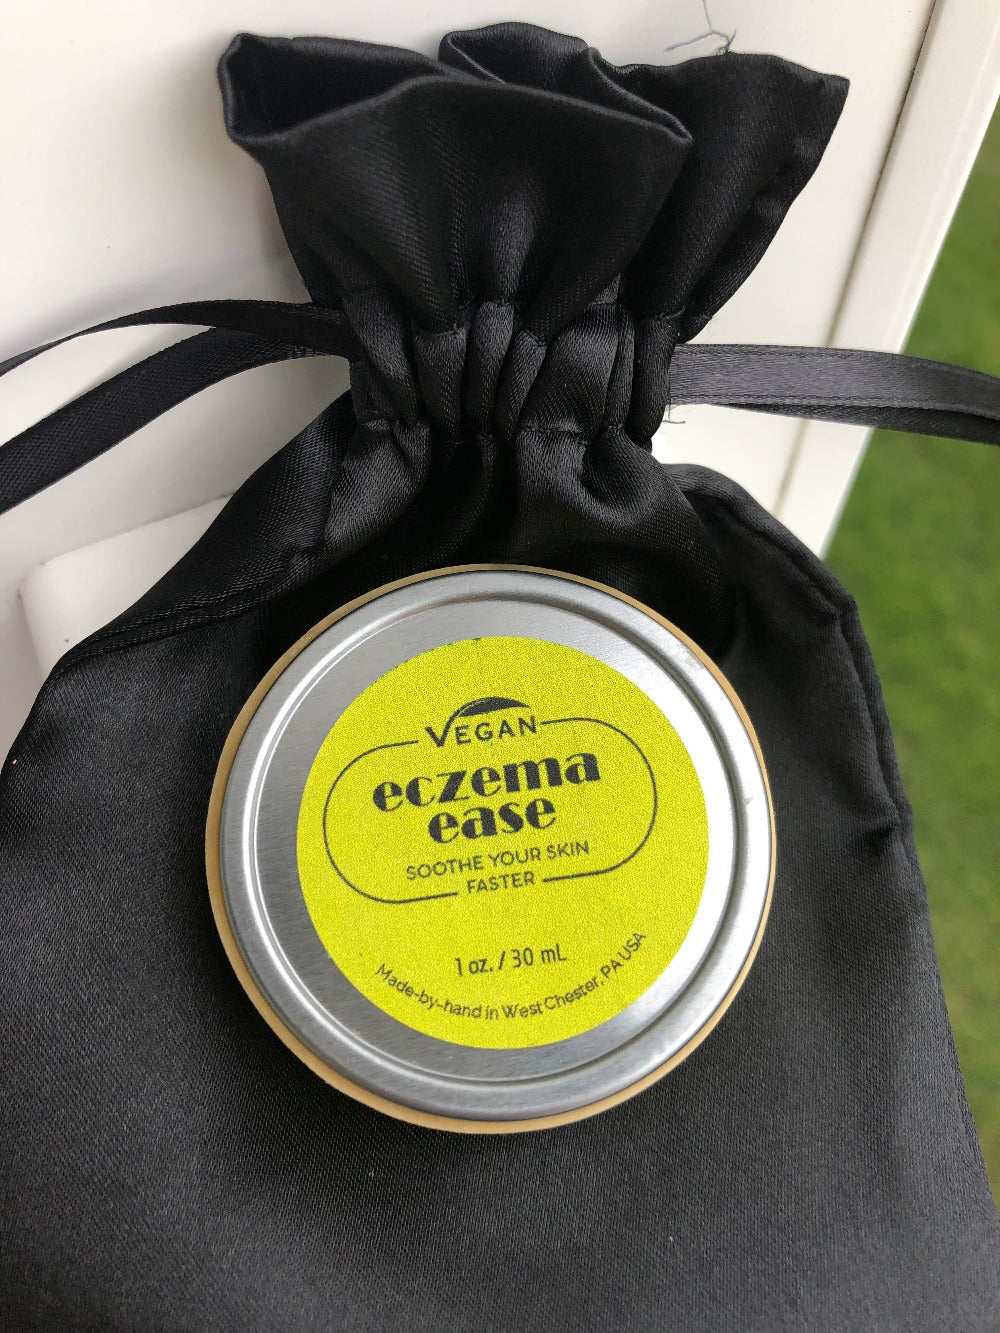 eczema ease balm in round flat tin with a black satin gift bag by nicmarie